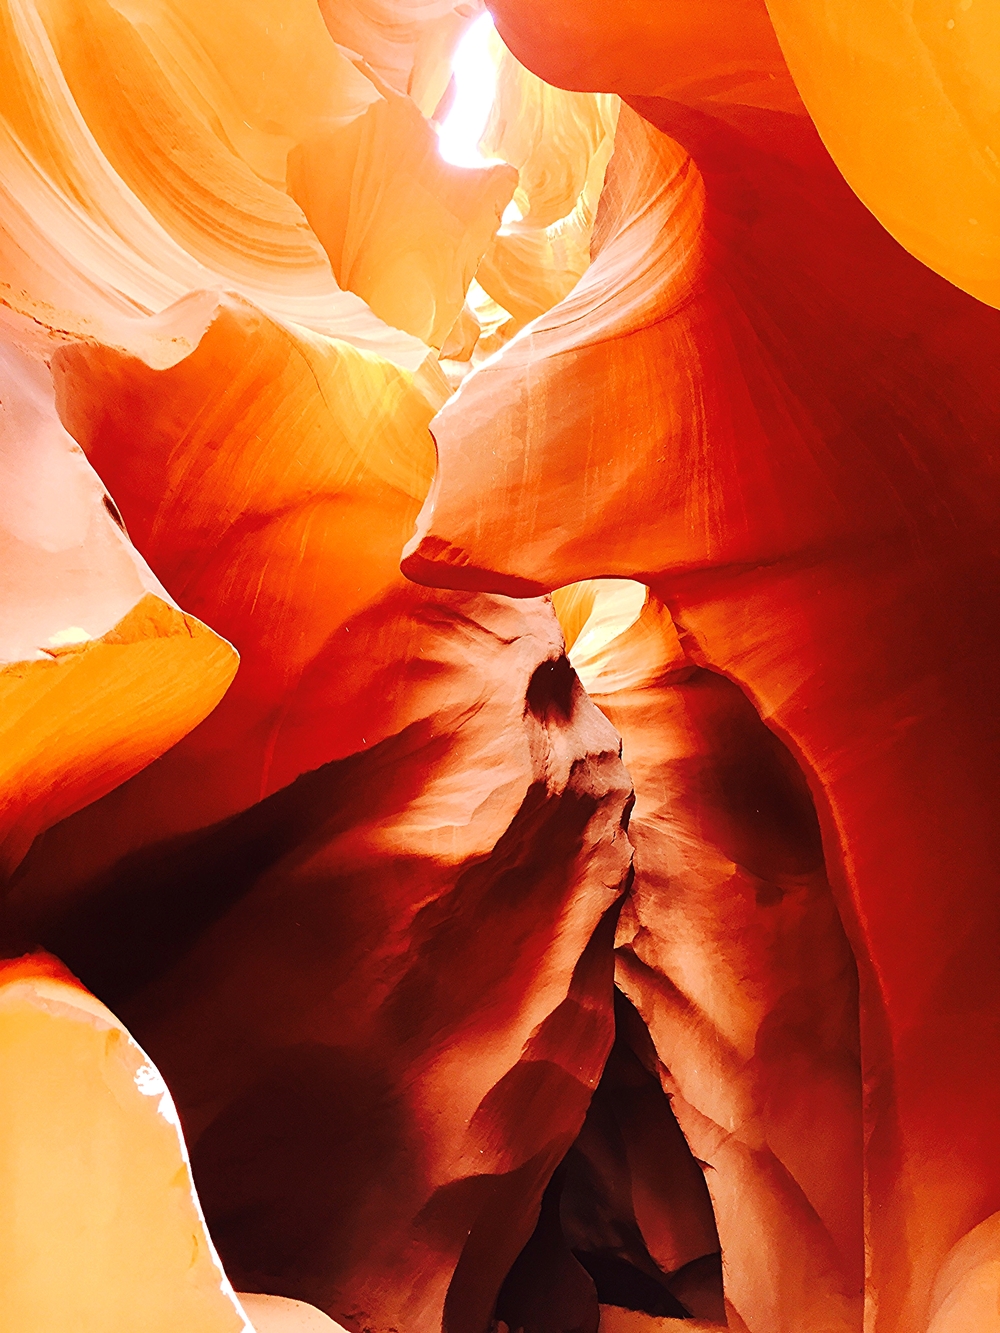 "Native American Chief" in Lower Antelope Canyon